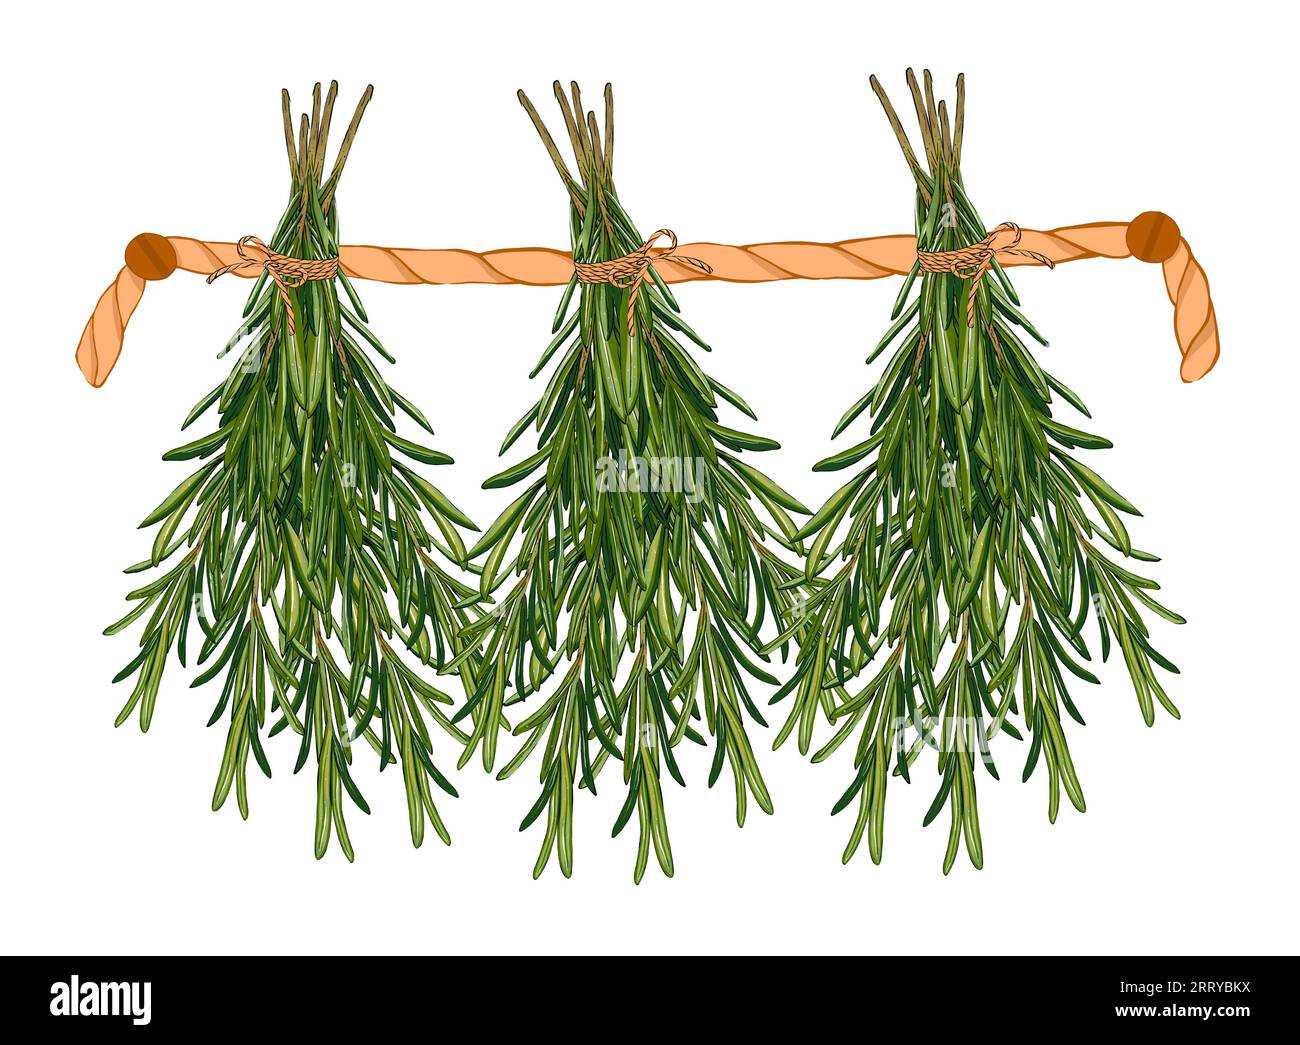 Fragrant herbs. Bunches of rosemary hanging from a rope. Hand drawn illustration. Alternative medicine Stock Photo